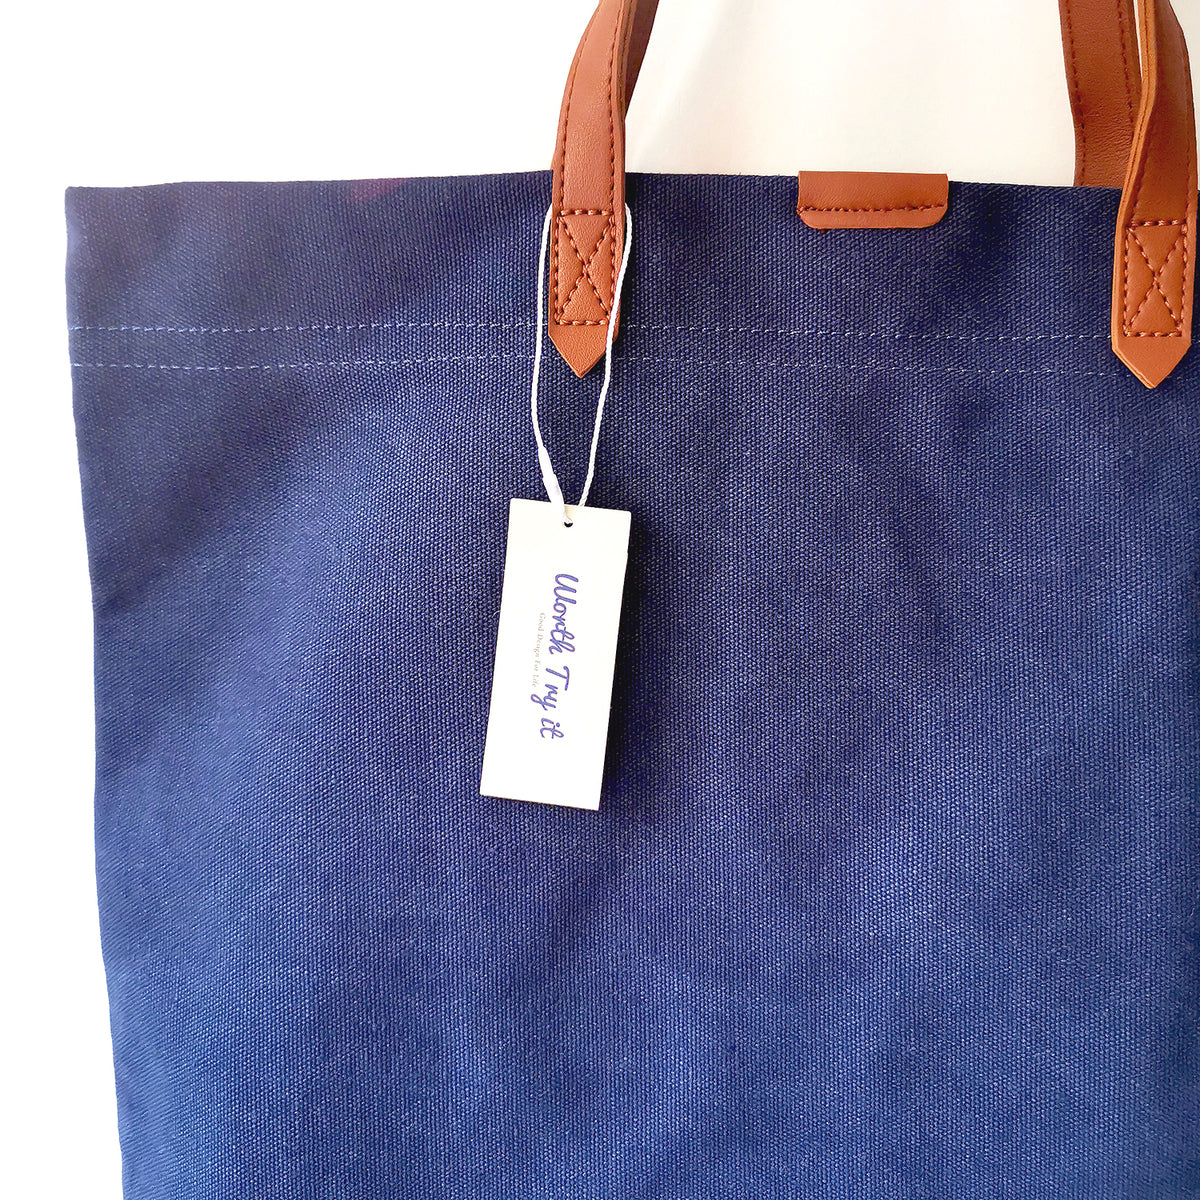 Canvas Bag with Leather Handles Transport Oversized Tote Bags